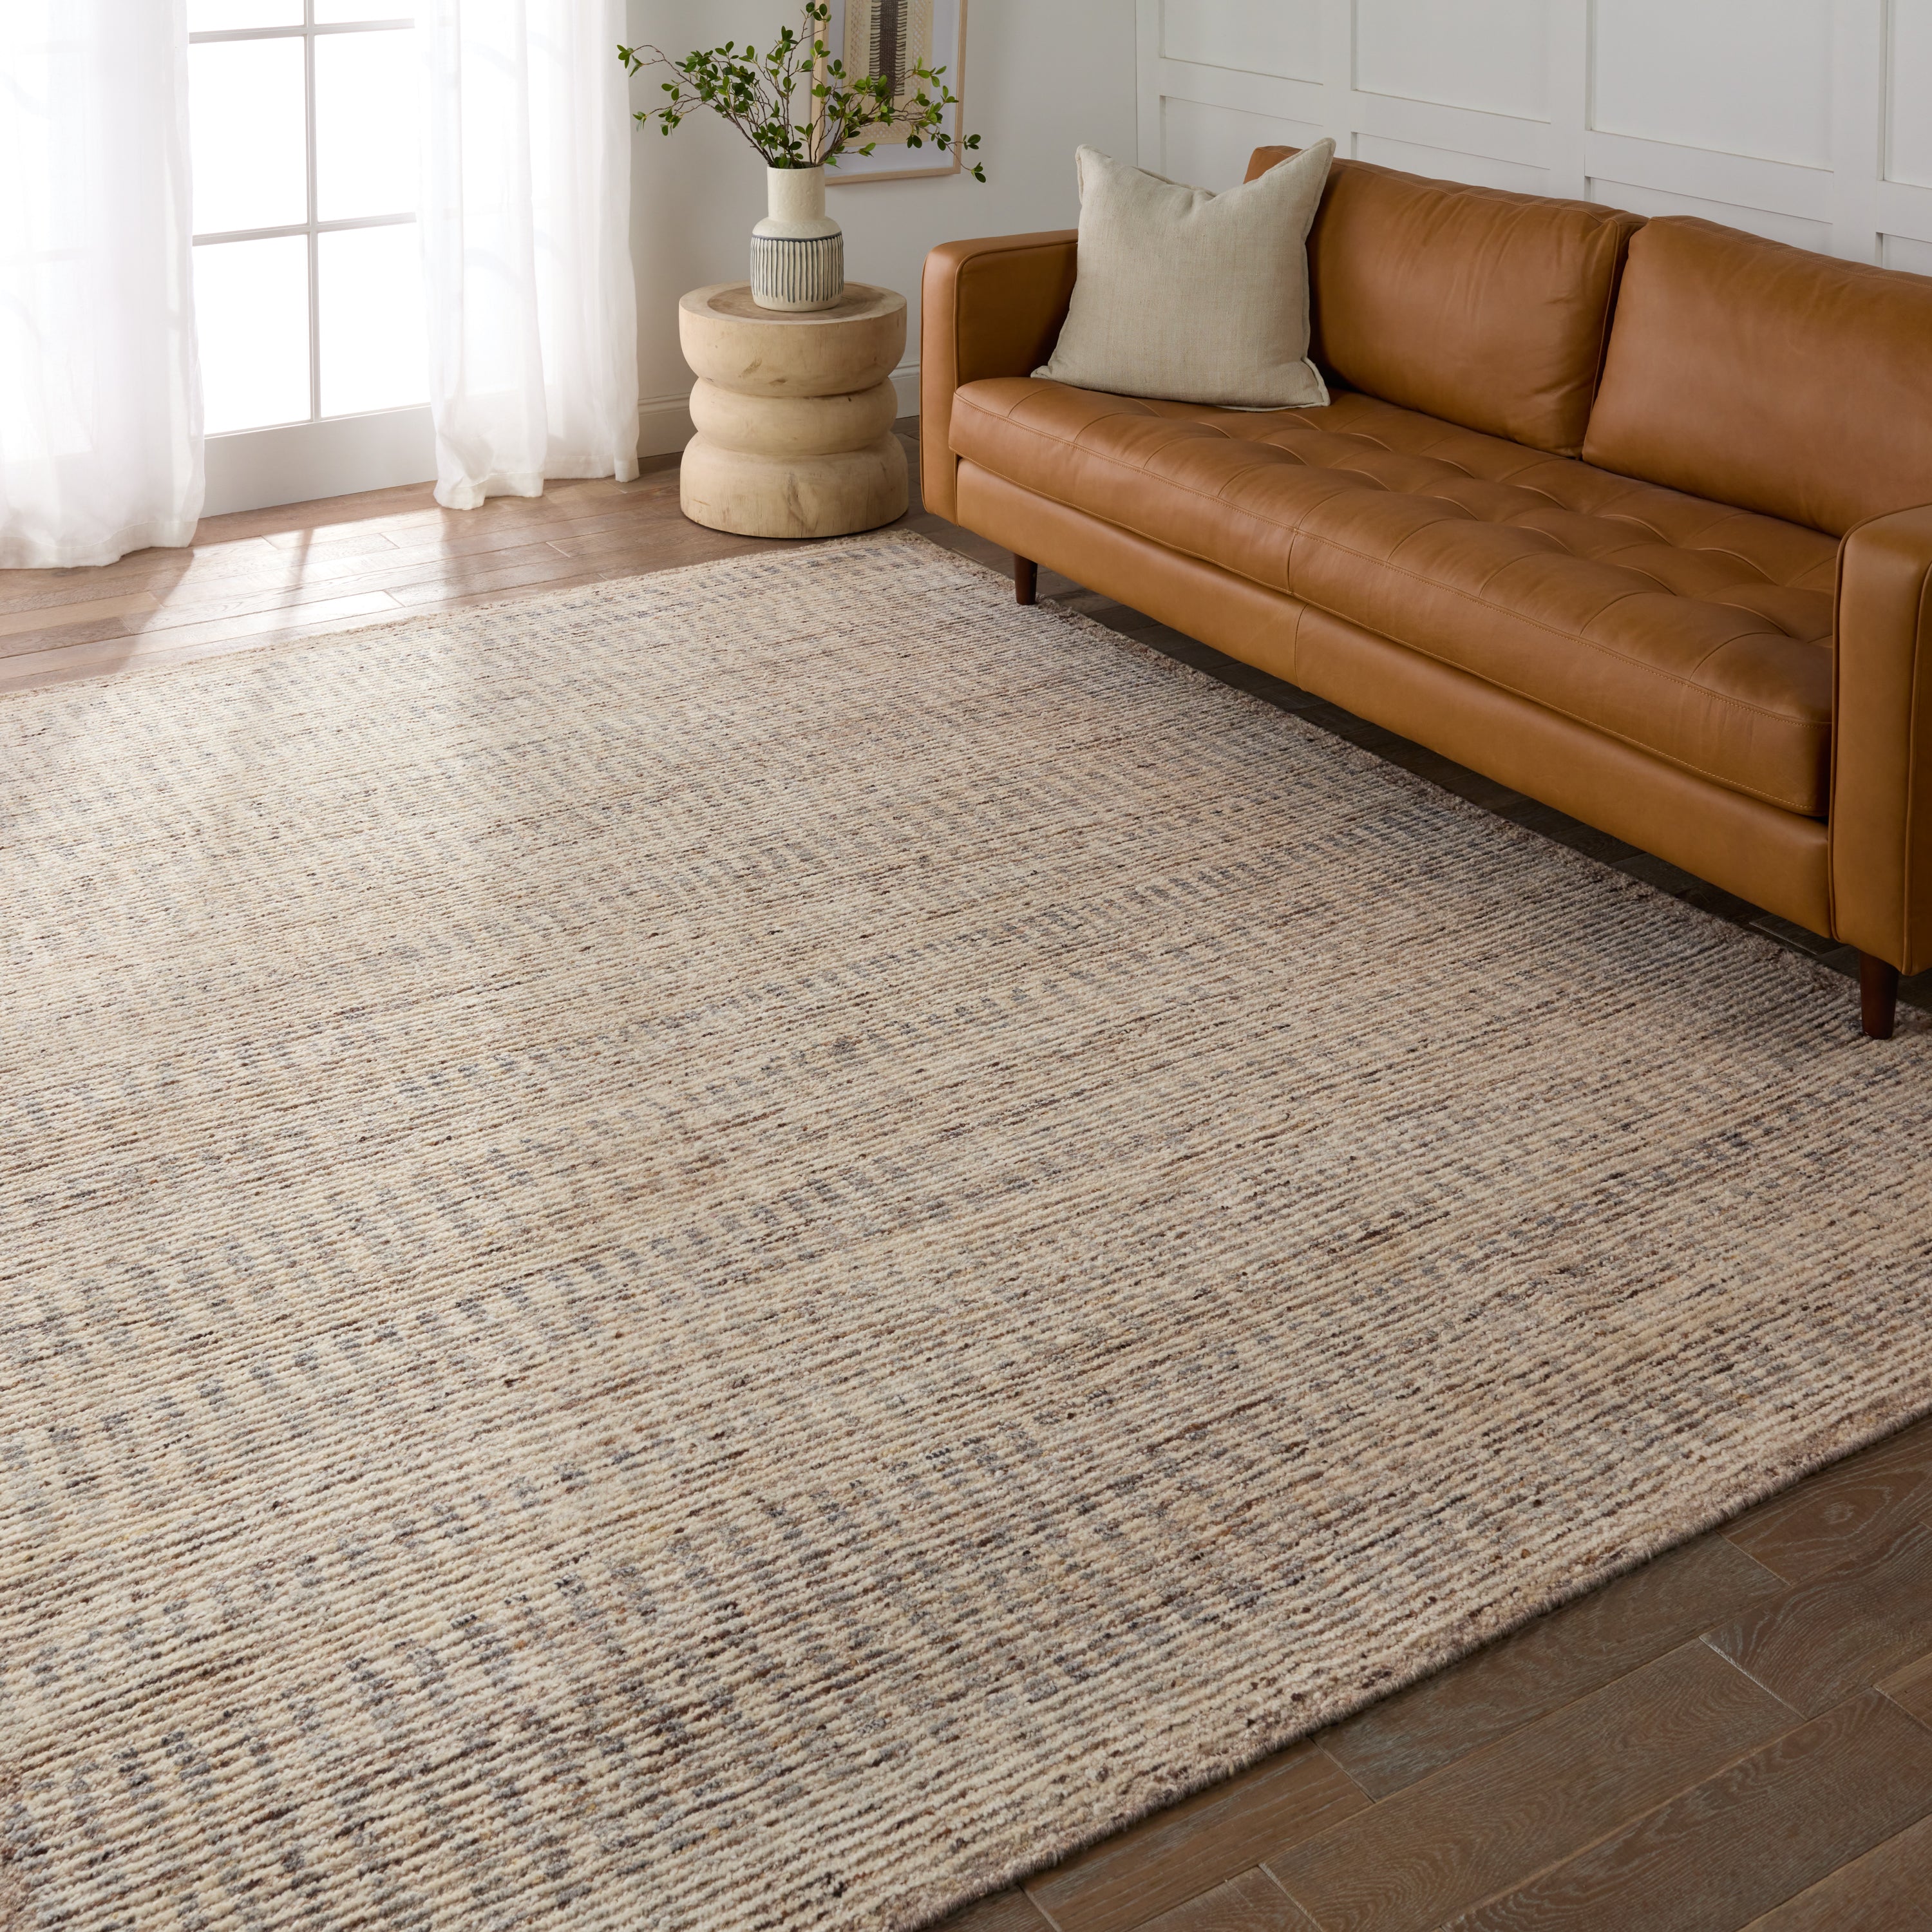 Subtle linear textures and natural colorways define the irresistible quality of the Seora collection. The Camino area rug features a series of perpendicular, striped lines for an intriguing dose of modern appeal. The textural, wool pile contains no dye, reflecting the natural colors of the sheep, for a rich and grounding palette of tan, cream, and flecks of brown and gray.  Amethyst Home provides interior design, new construction, custom furniture, and area rugs in the Scottsdale metro area.